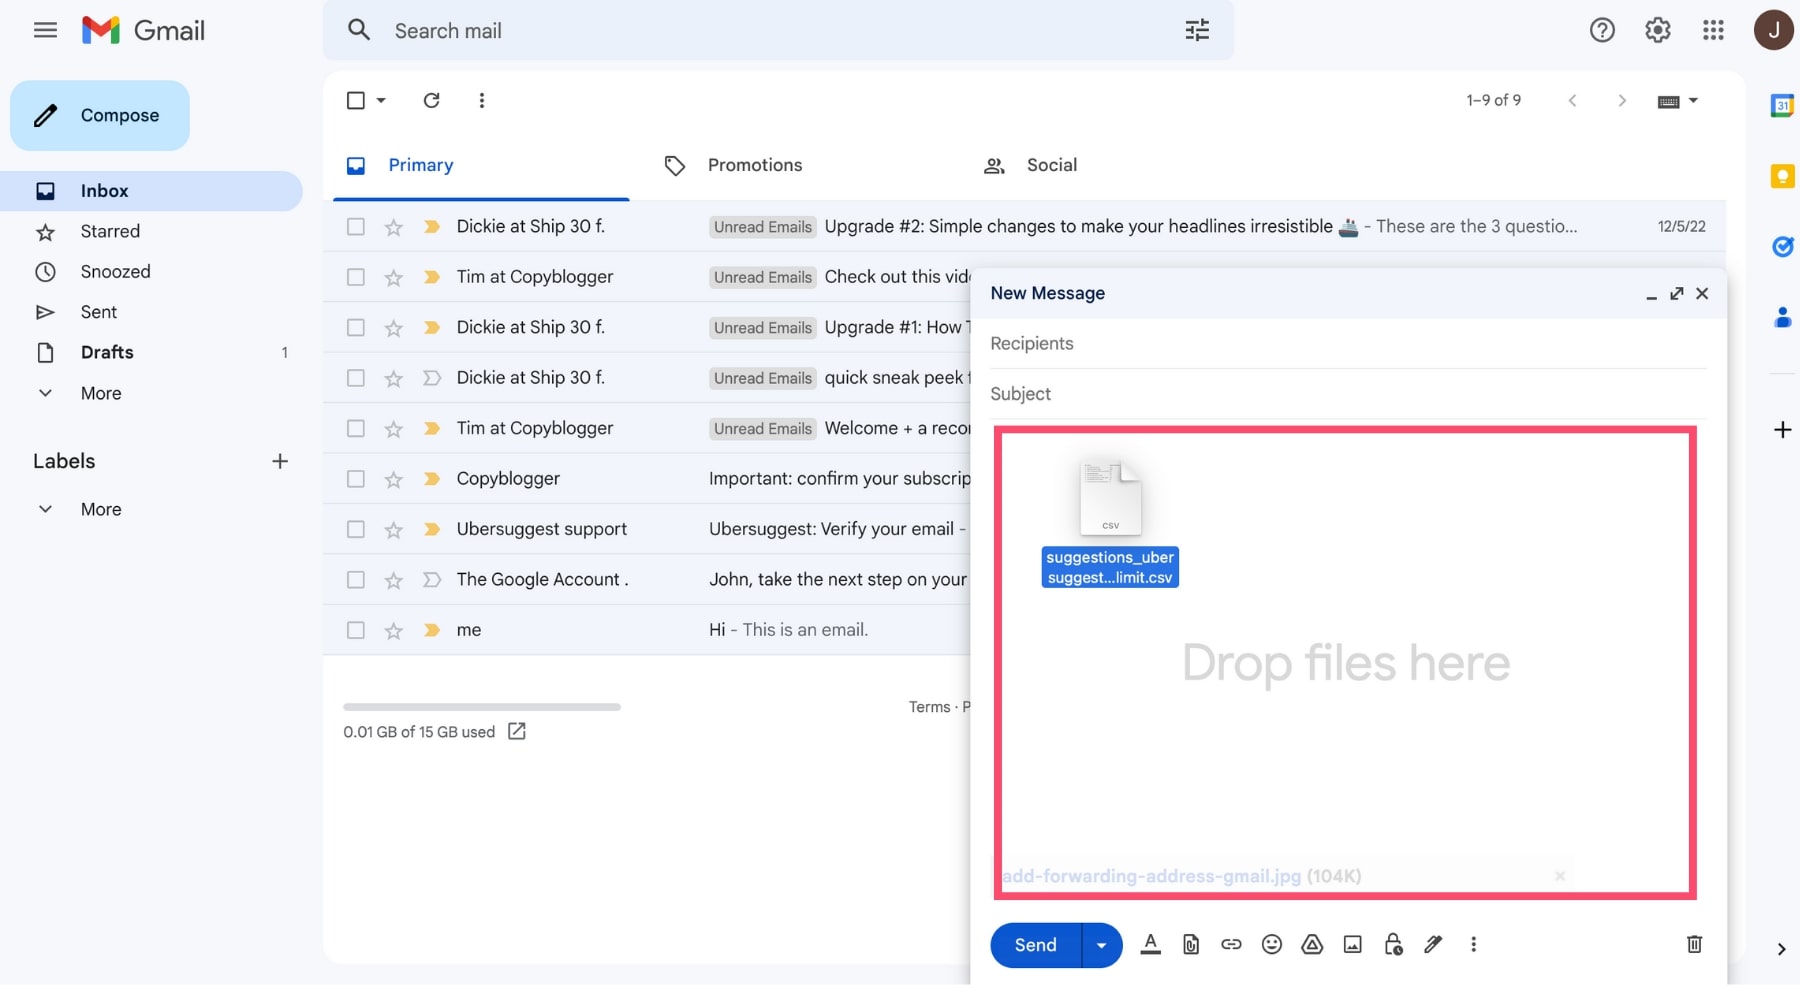 Drag and drop files in Gmail